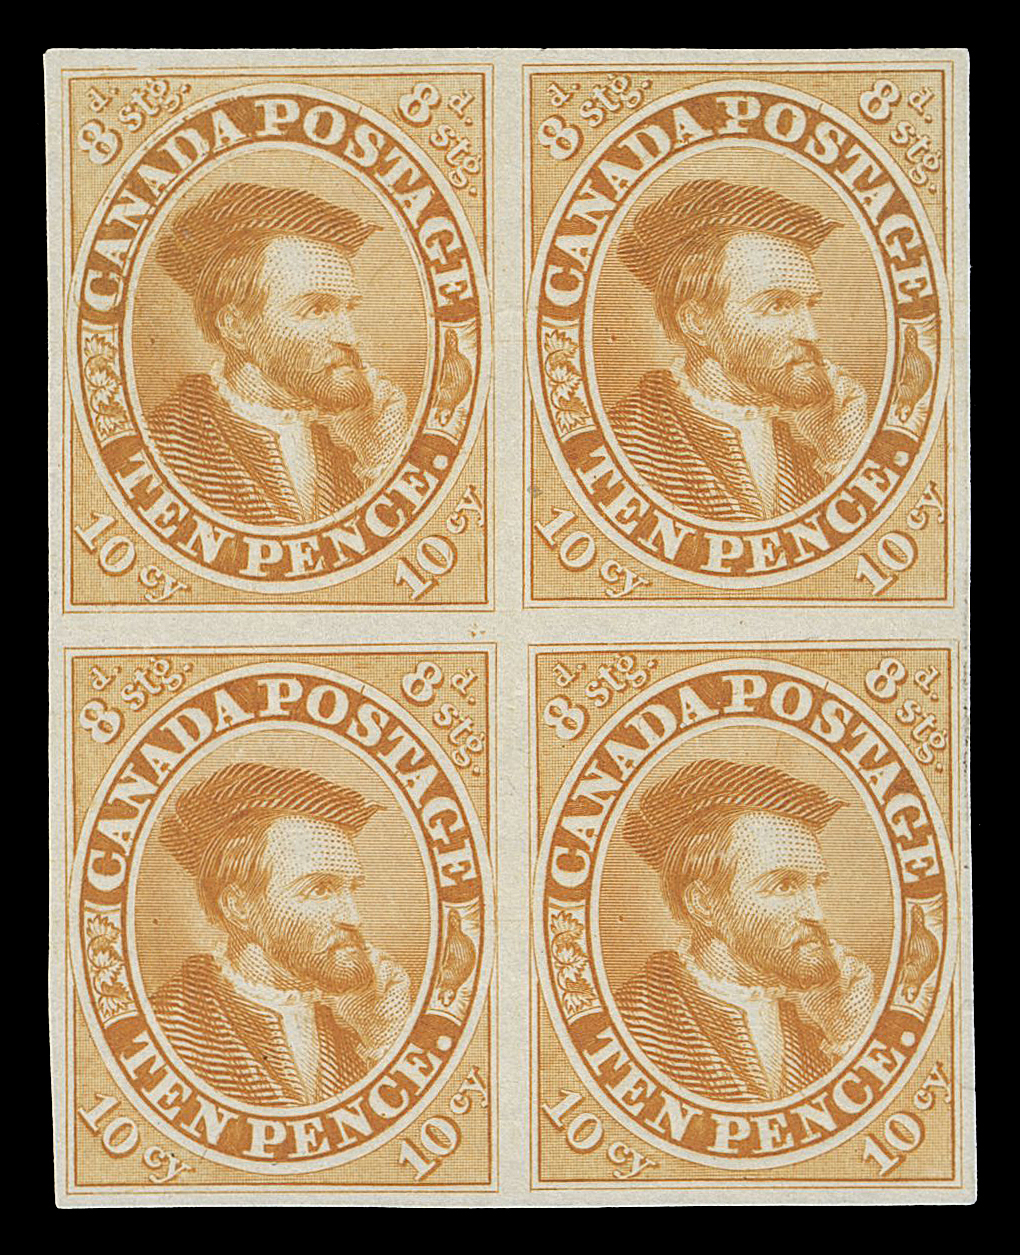 TEN PENCE AND SEVENTEEN CENTS  7TCiii + variety,A beautiful trial colour plate proof block printed in orange yellow on india paper, the upper left proof shows the Major Re-entry (Position 29), very rare and in our opinion, the most sought-after plate variety found on this particular stamp, VF (Unitrade cat. as normal single proofs)

Provenance: Henry Gates (Part 1), Maresch 124, March 1981; Lot 326
The "Lindemann" Collection (private treaty, circa. 1997)